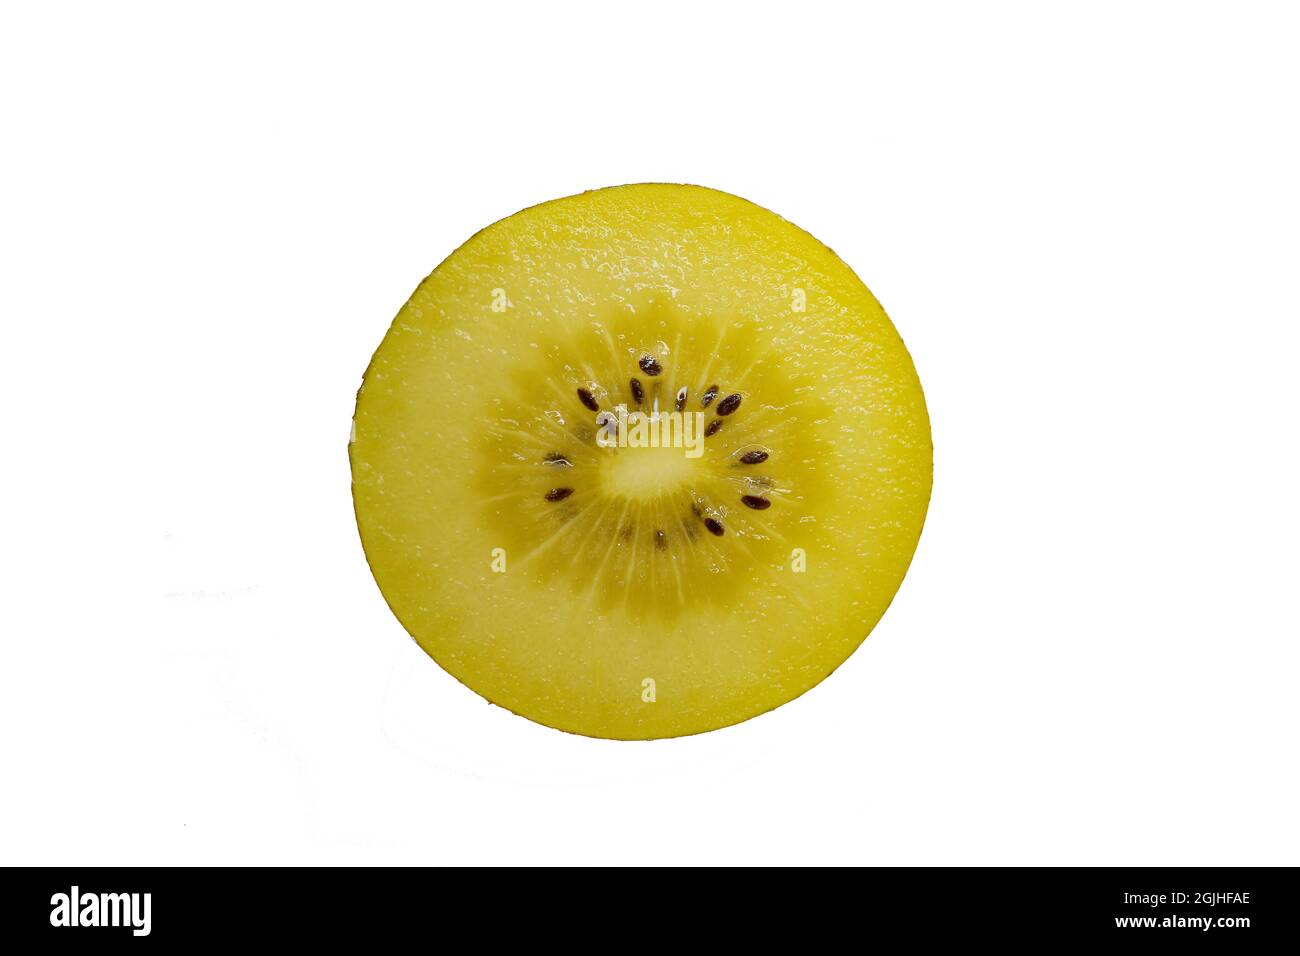 Cross section of a Golden Kiwifruit or Chinese gooseberry (Actinidia chinensis), isolated on white background Stock Photo